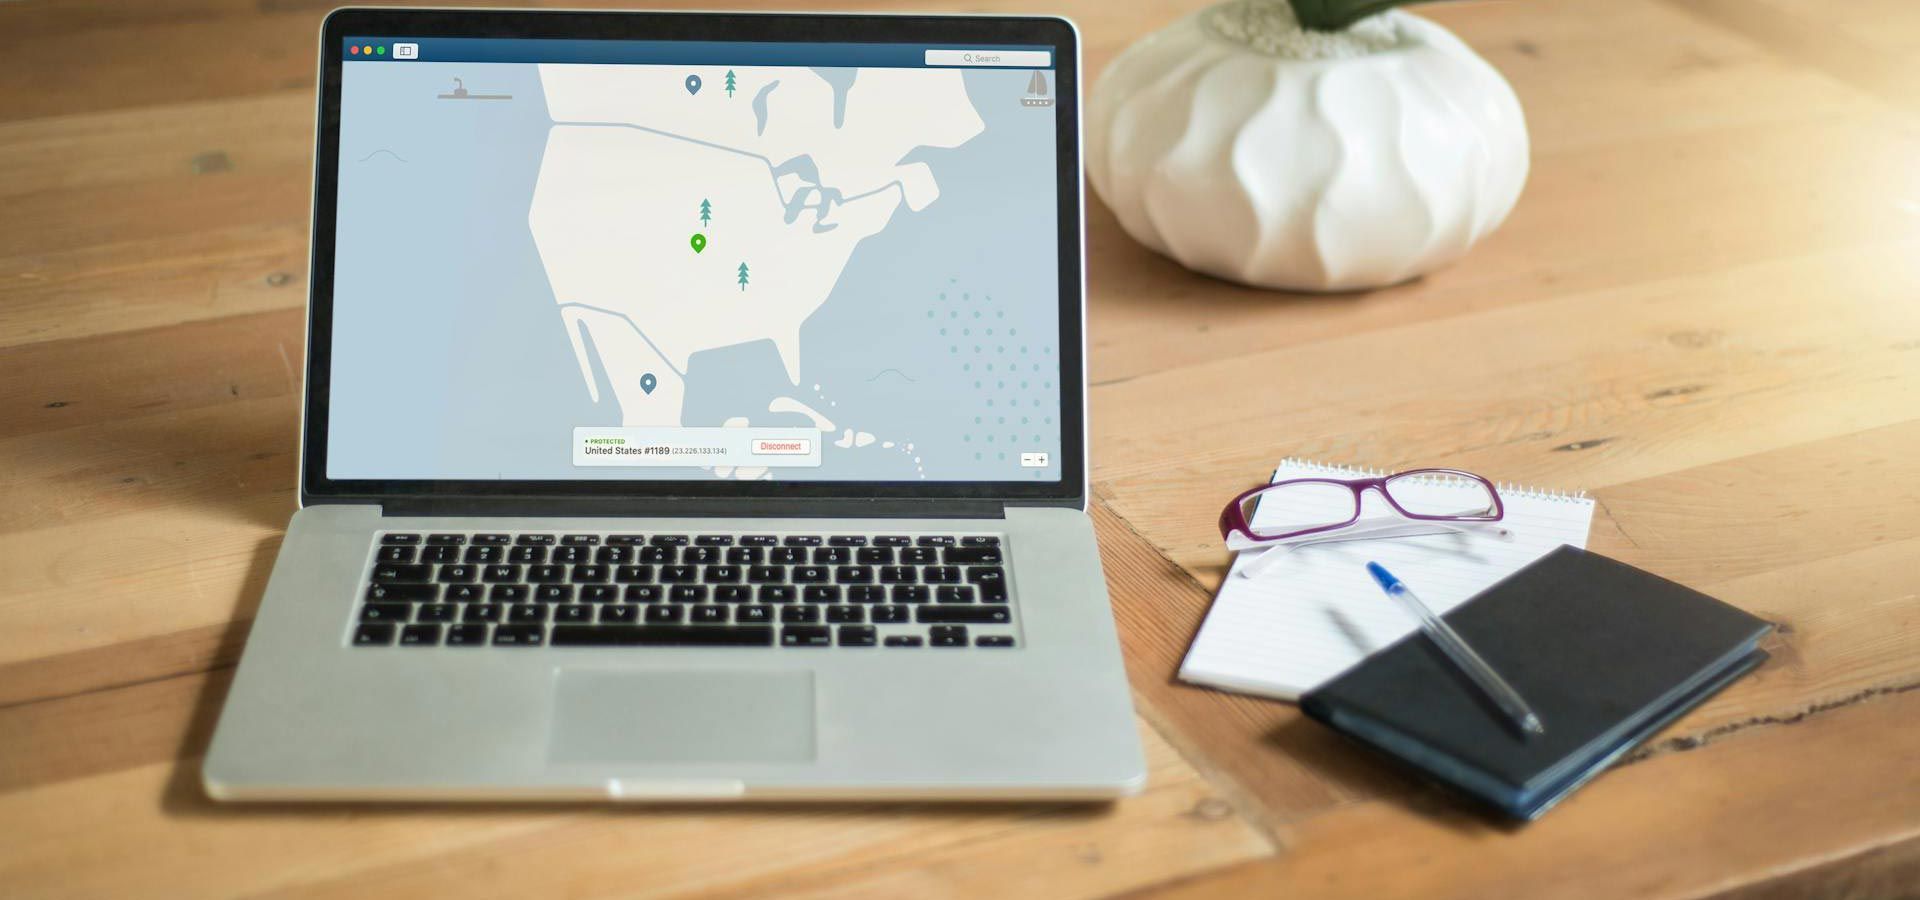 A laptop is open to a map of the united states